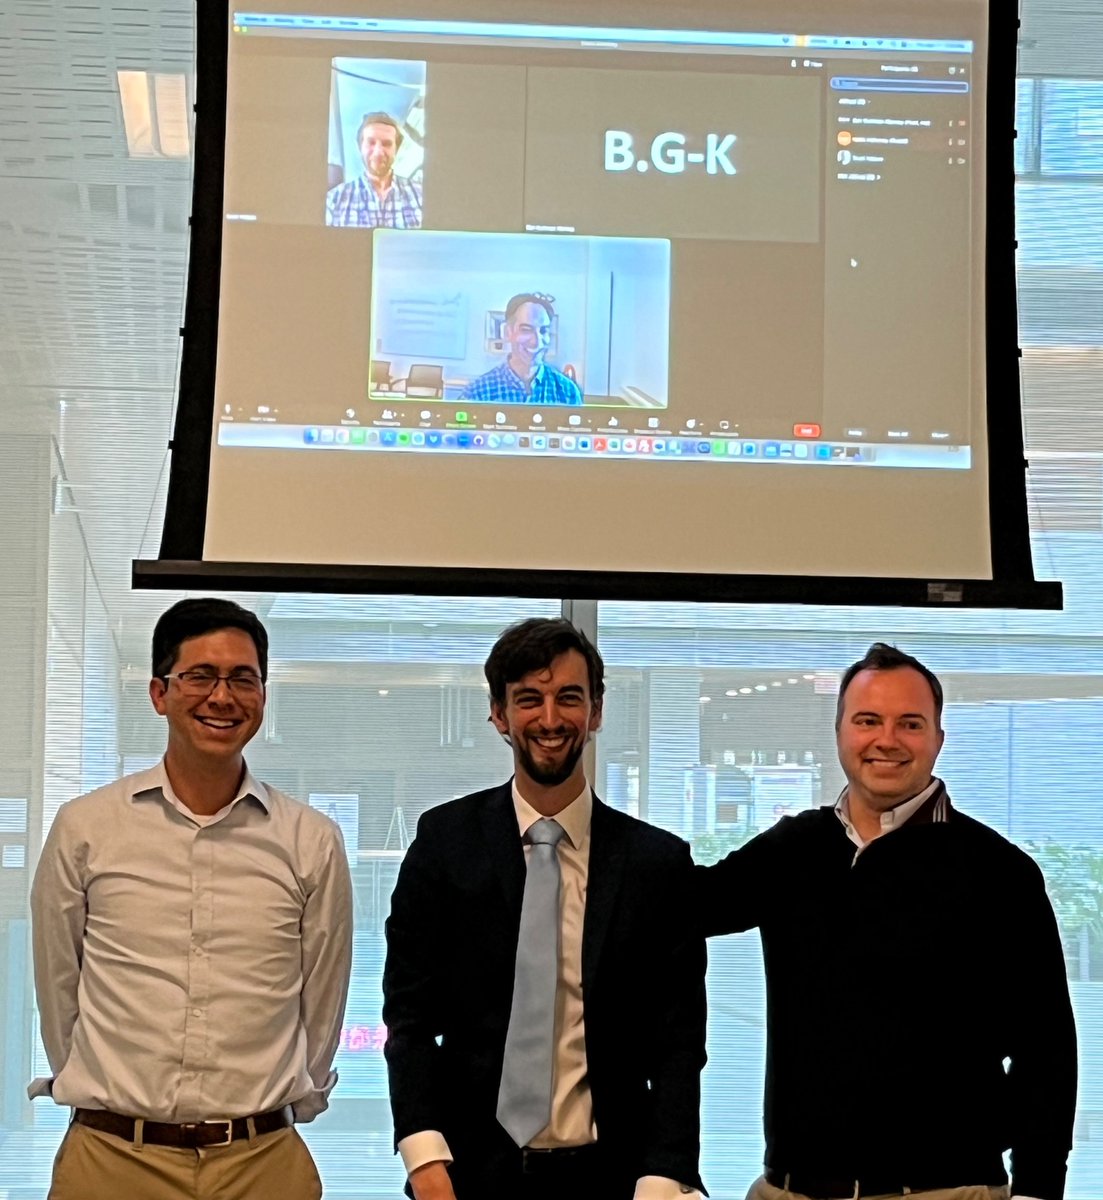 PhD defence ✅ Huge thanks to my amazing committee @chicagobooth @ProfNoto @nealemahoney Constantine and Scott for their exceptional guidance! 🙏 Next step, publishing my dissertation chapters 😅